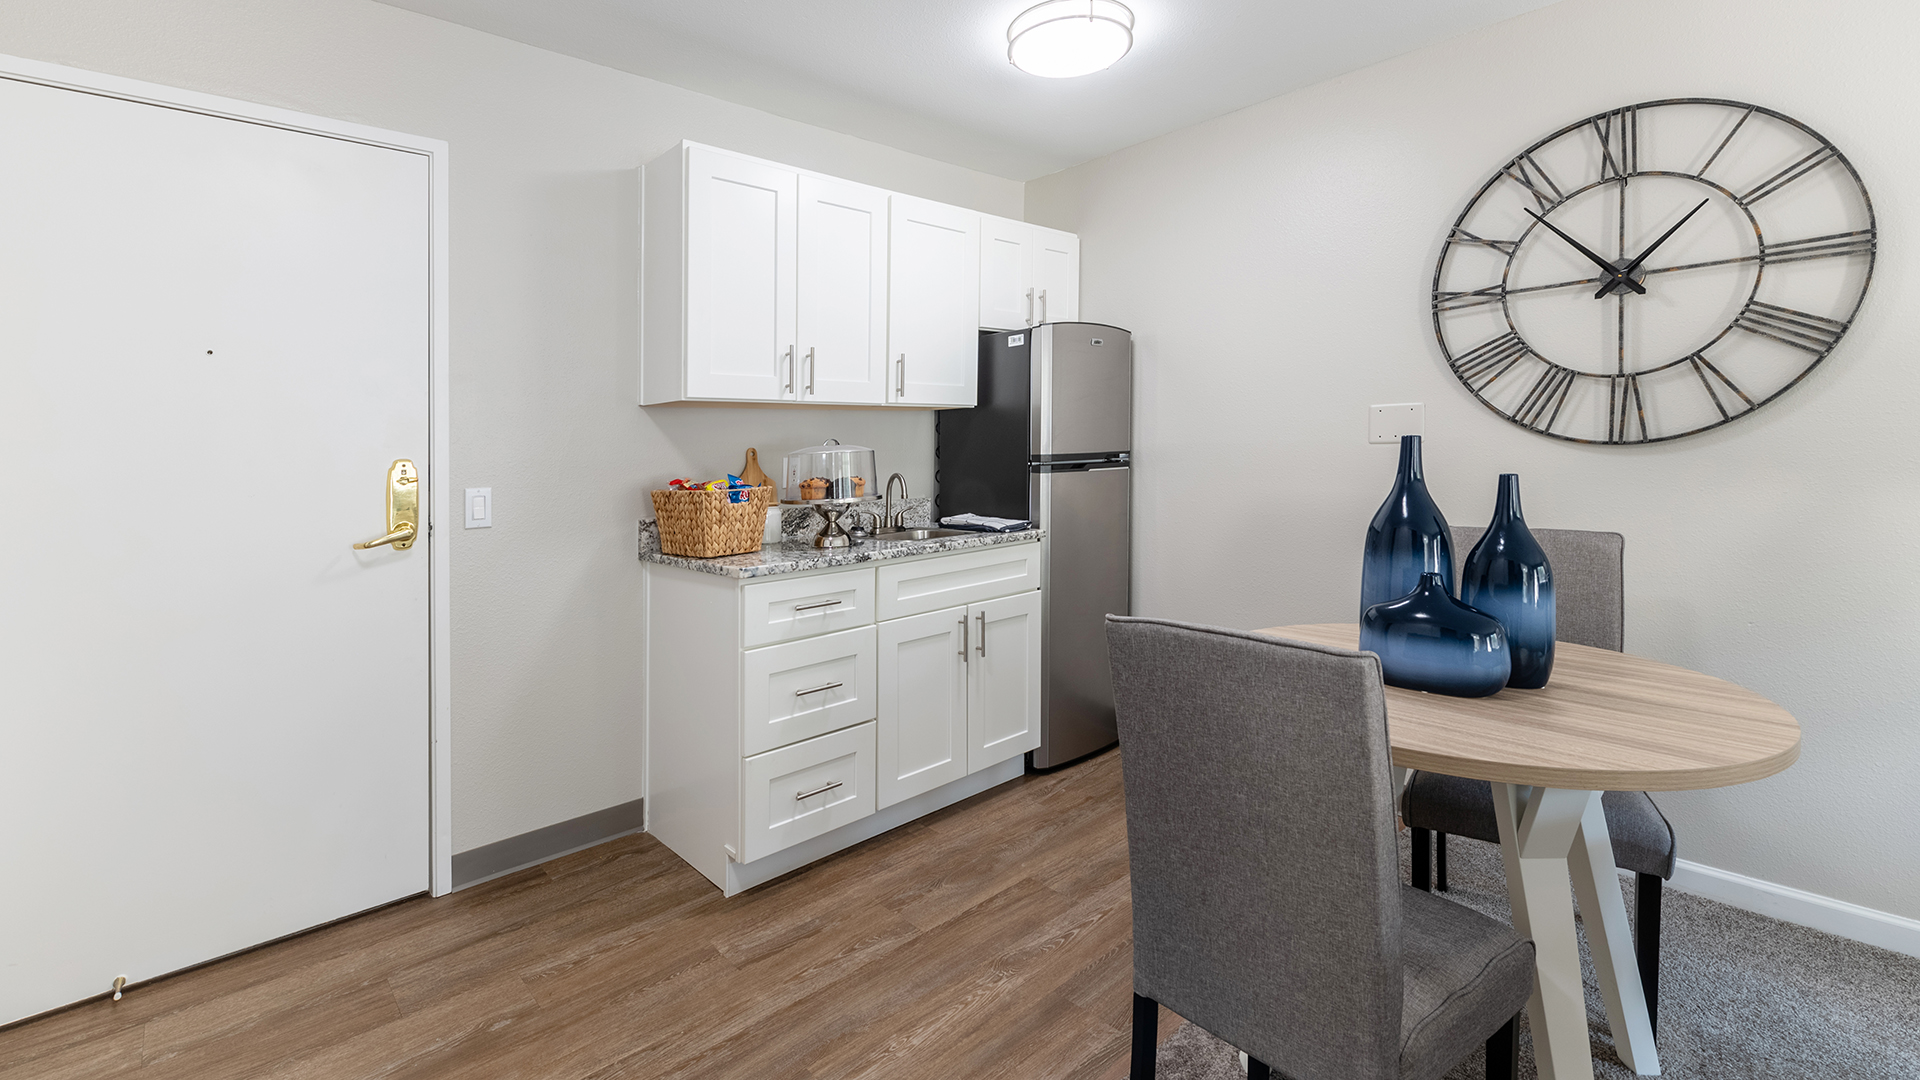 Apartment kitchenette and dining area